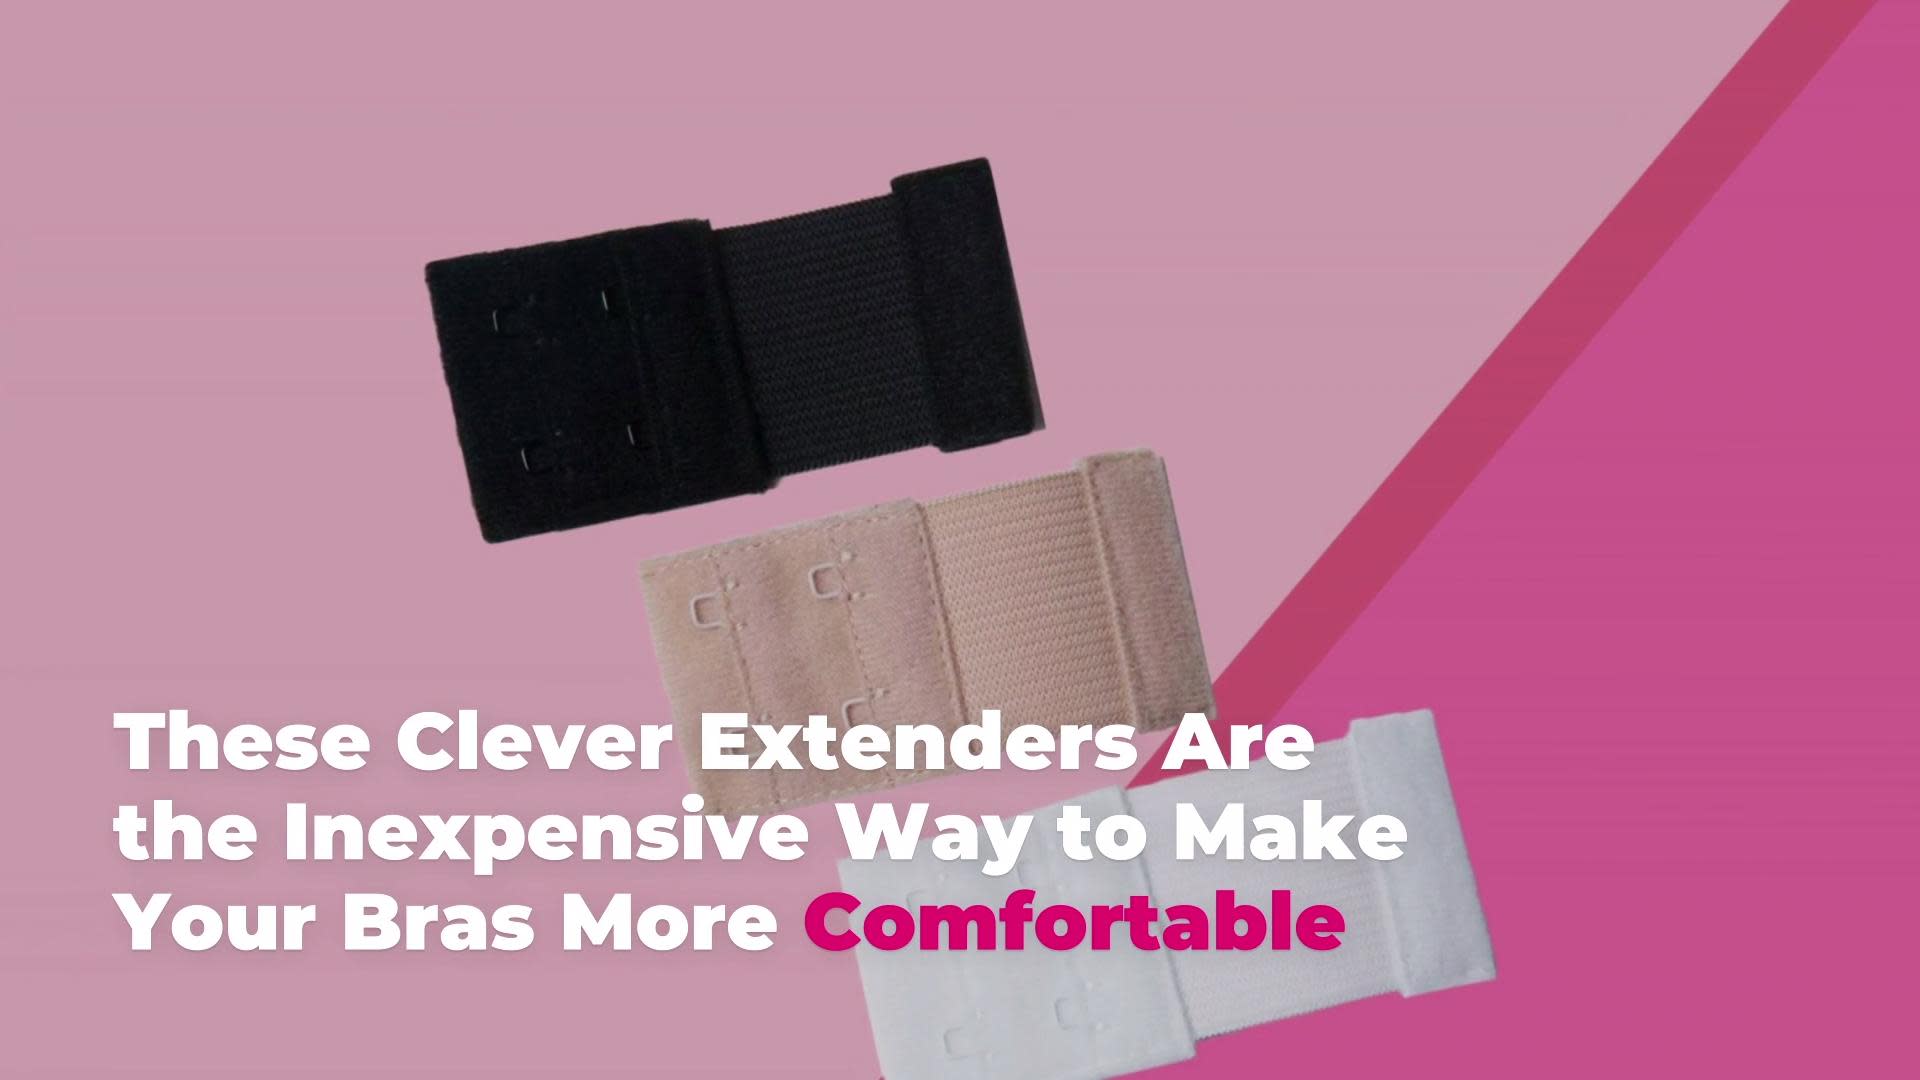 These Clever Extenders Are the Inexpensive Way to Make Your Bras Much More  Comfortable